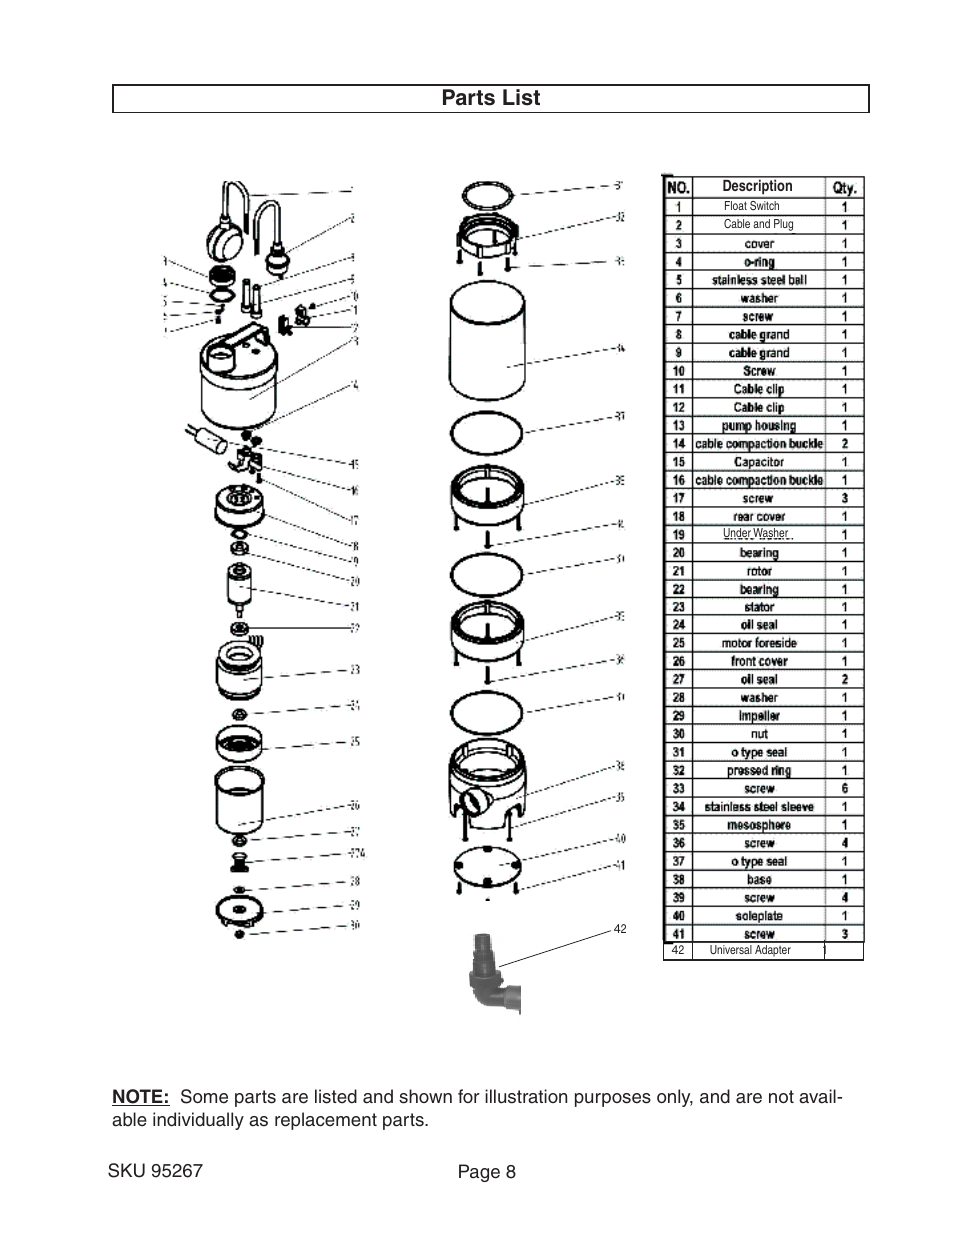 Parts list | Harbor Freight Tools PACIFIC HYDROSTAR 95267 User Manual ...